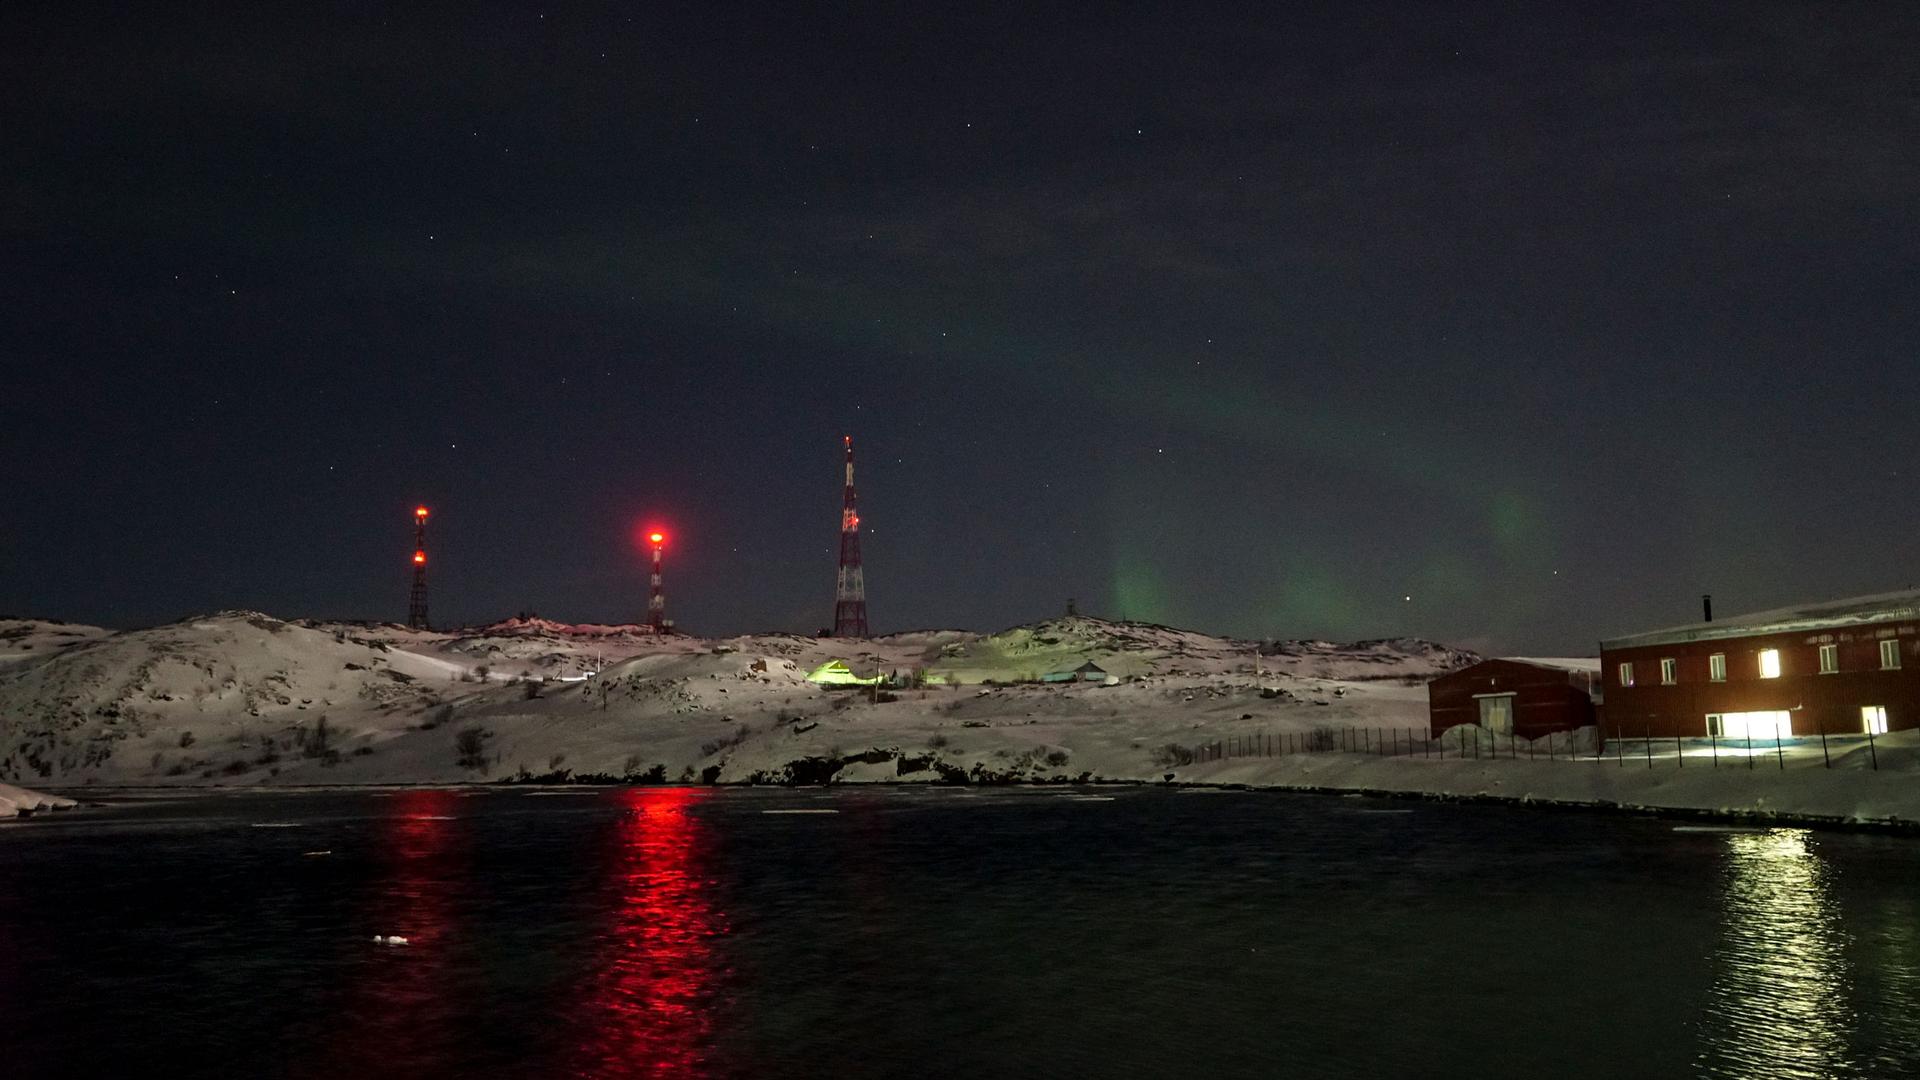 A green swirl of the northern lights is shown against a dark sky with antennas with red lights in the nearground.